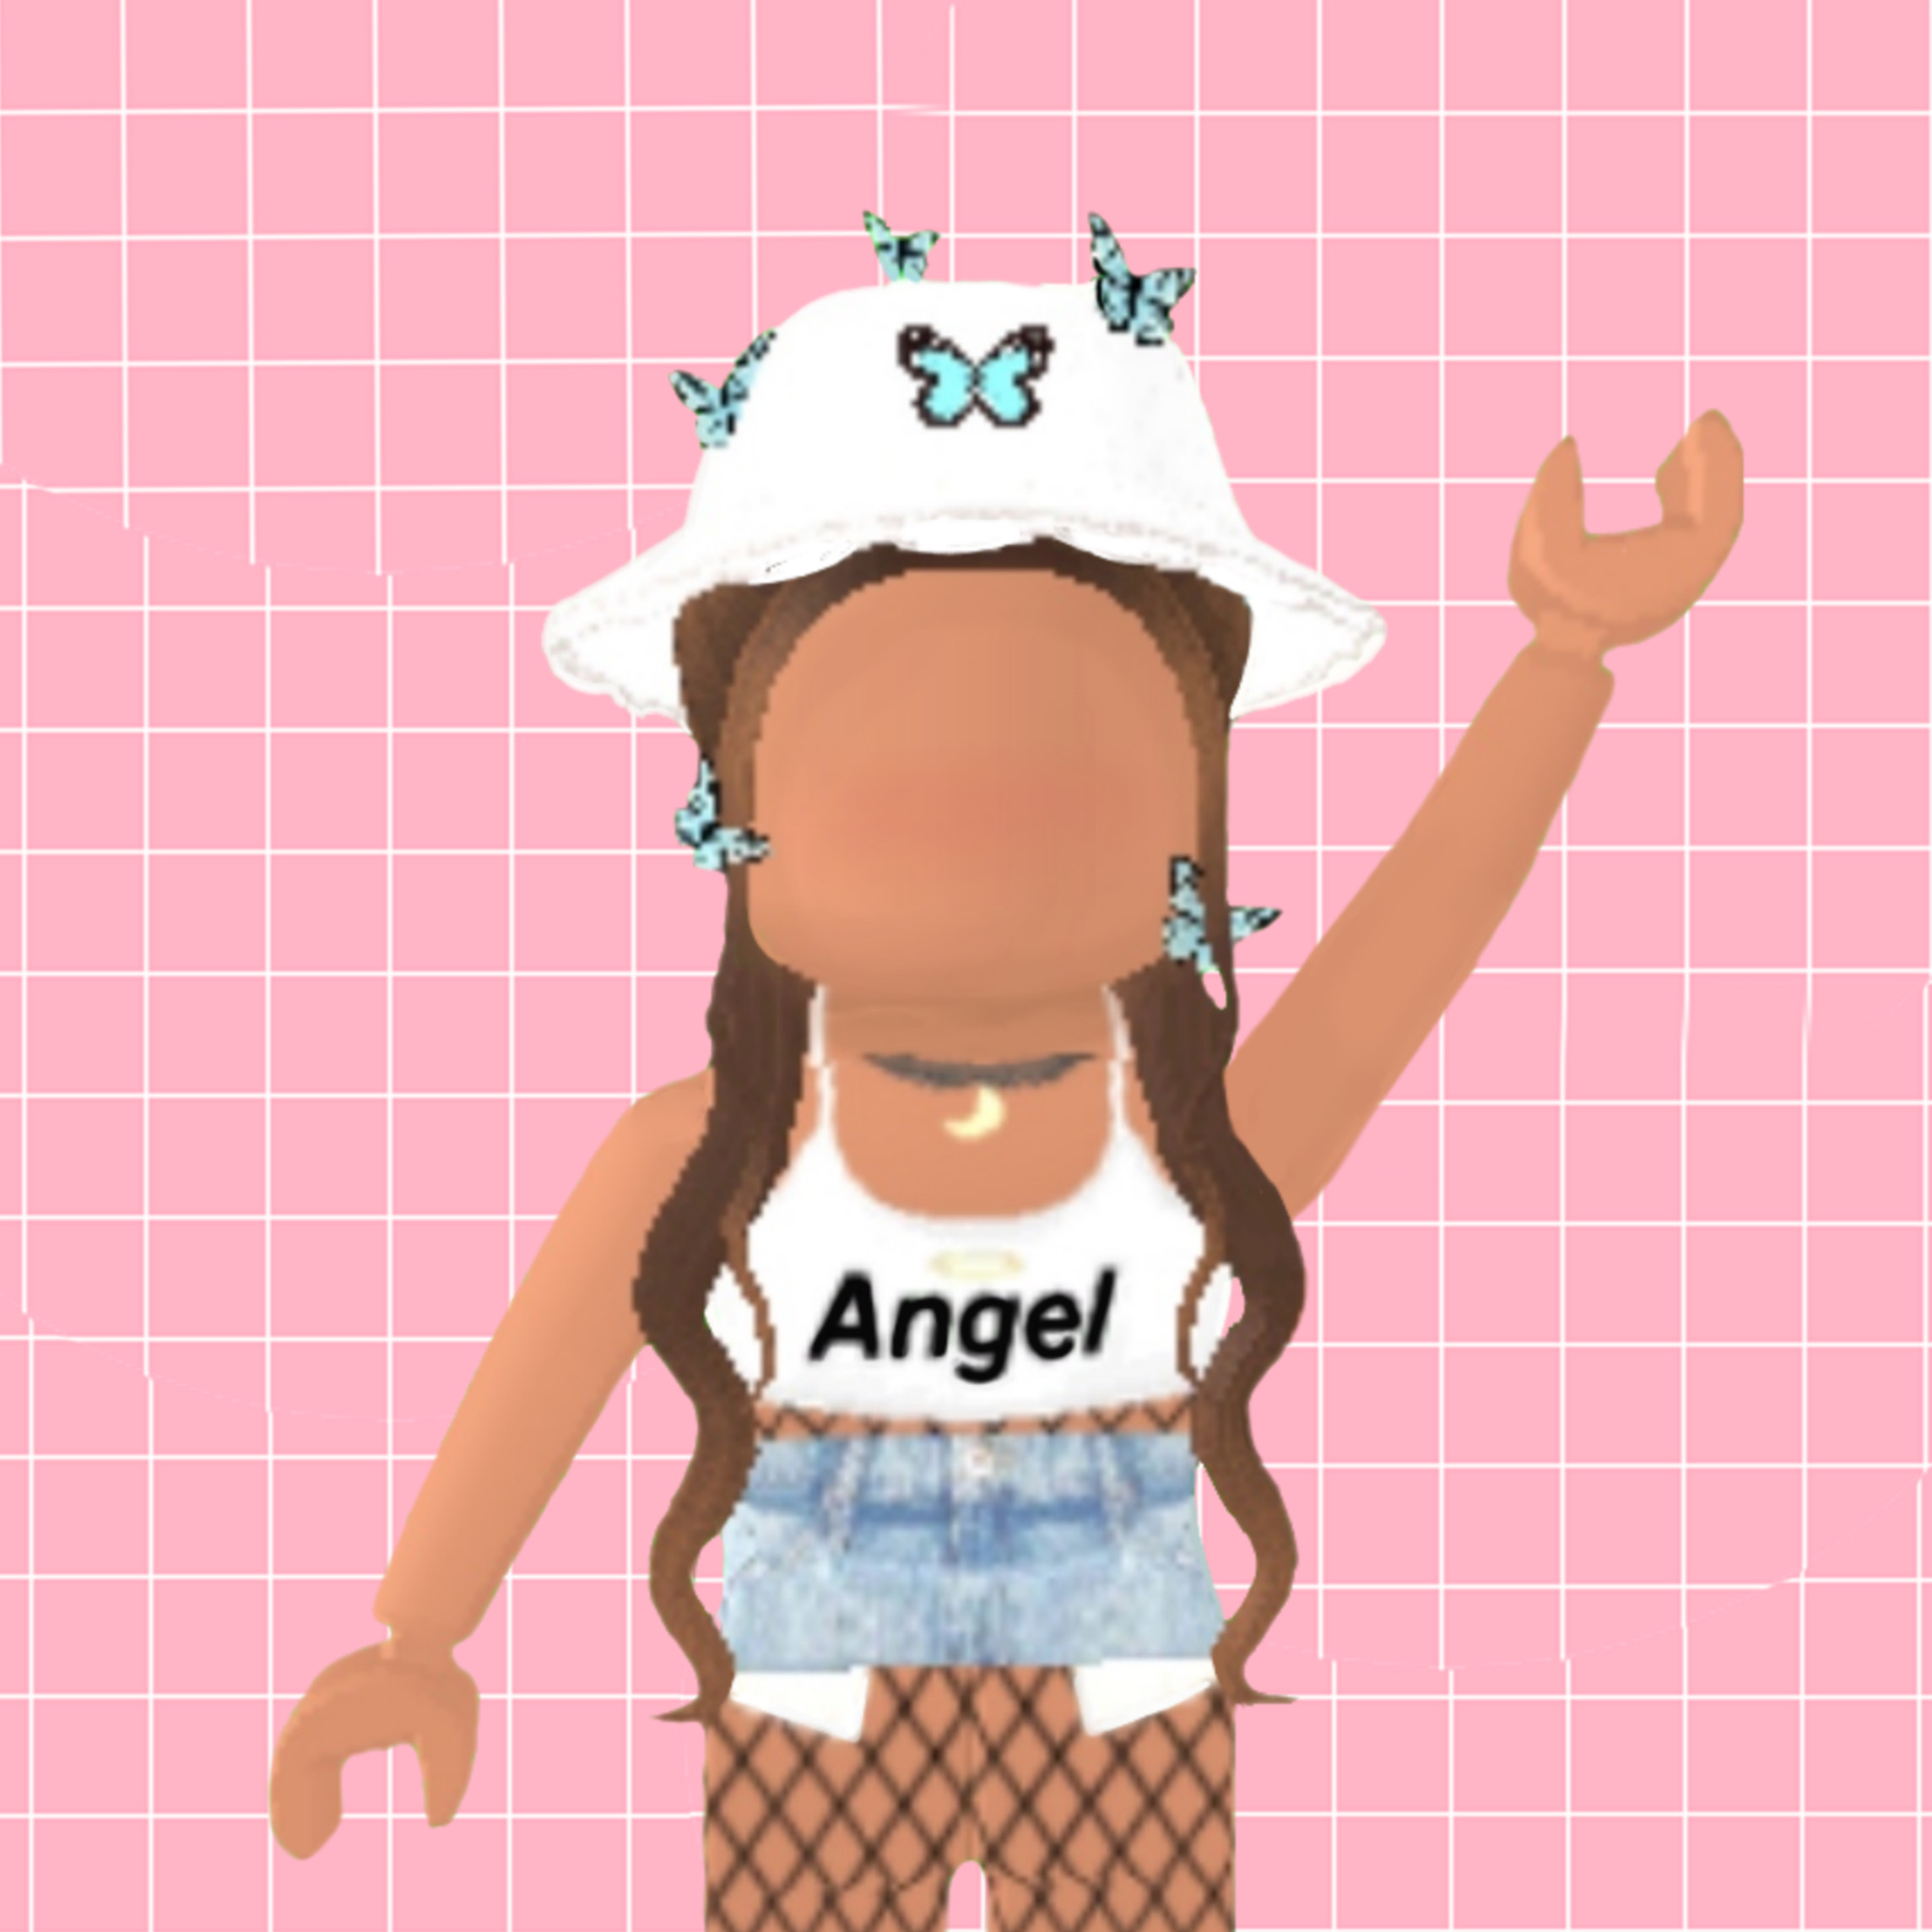 Roblox Angle Butterfly Blue Image By 𝕃𝕠𝕧𝕝𝕖𝕪 - blue butterfly cute roblox profile pictures